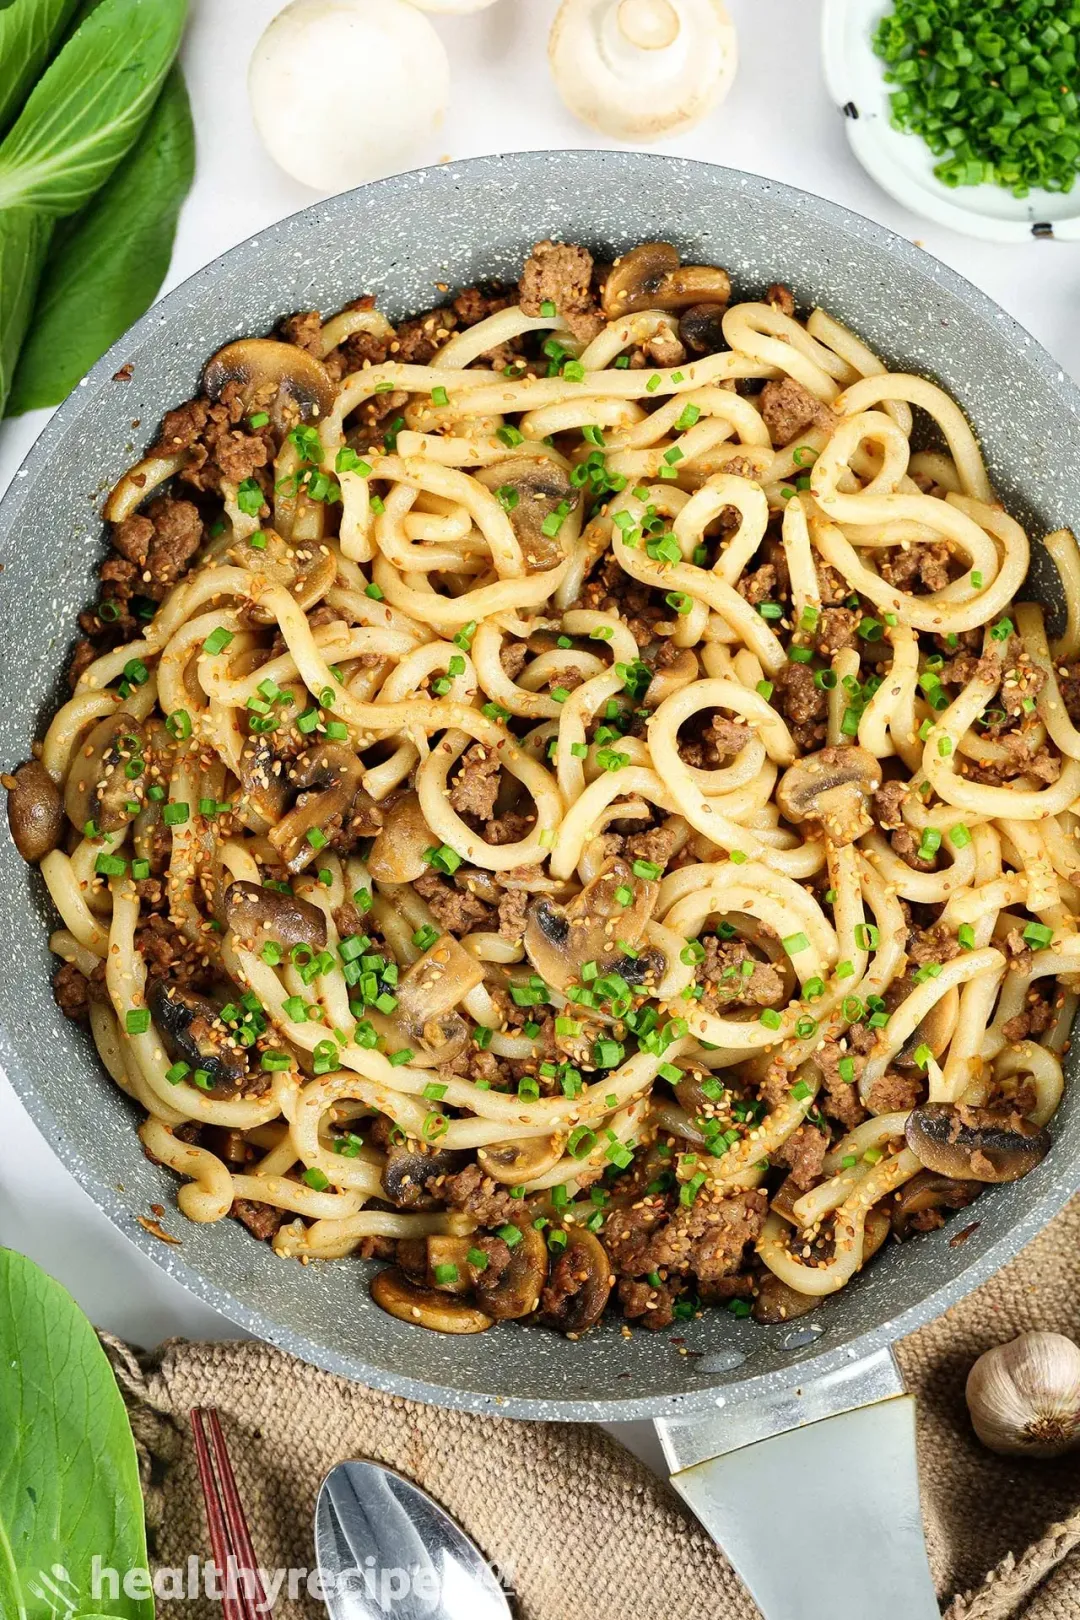 Asian Beef and Noodles Recipe